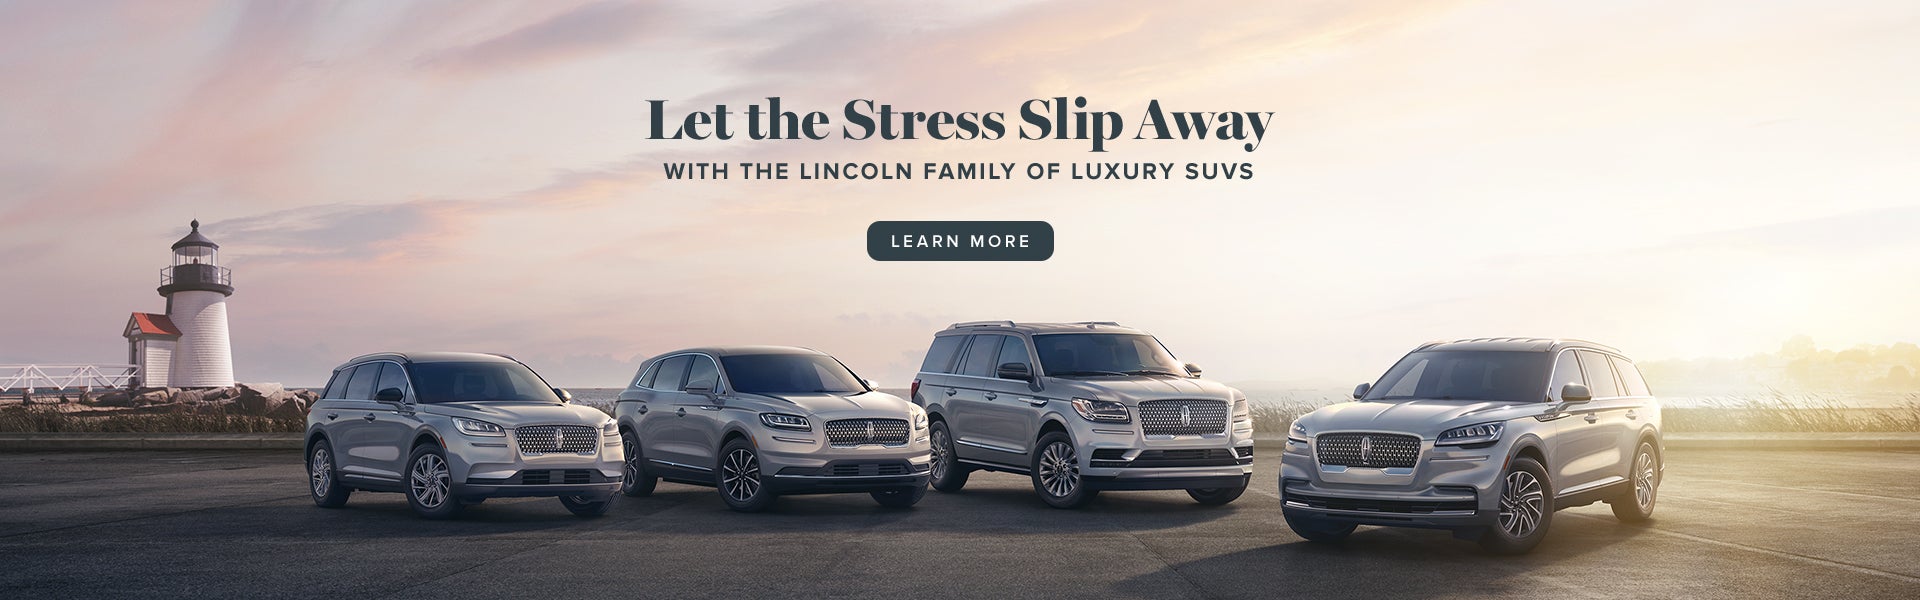 Lincoln Family of Luxury SUVs